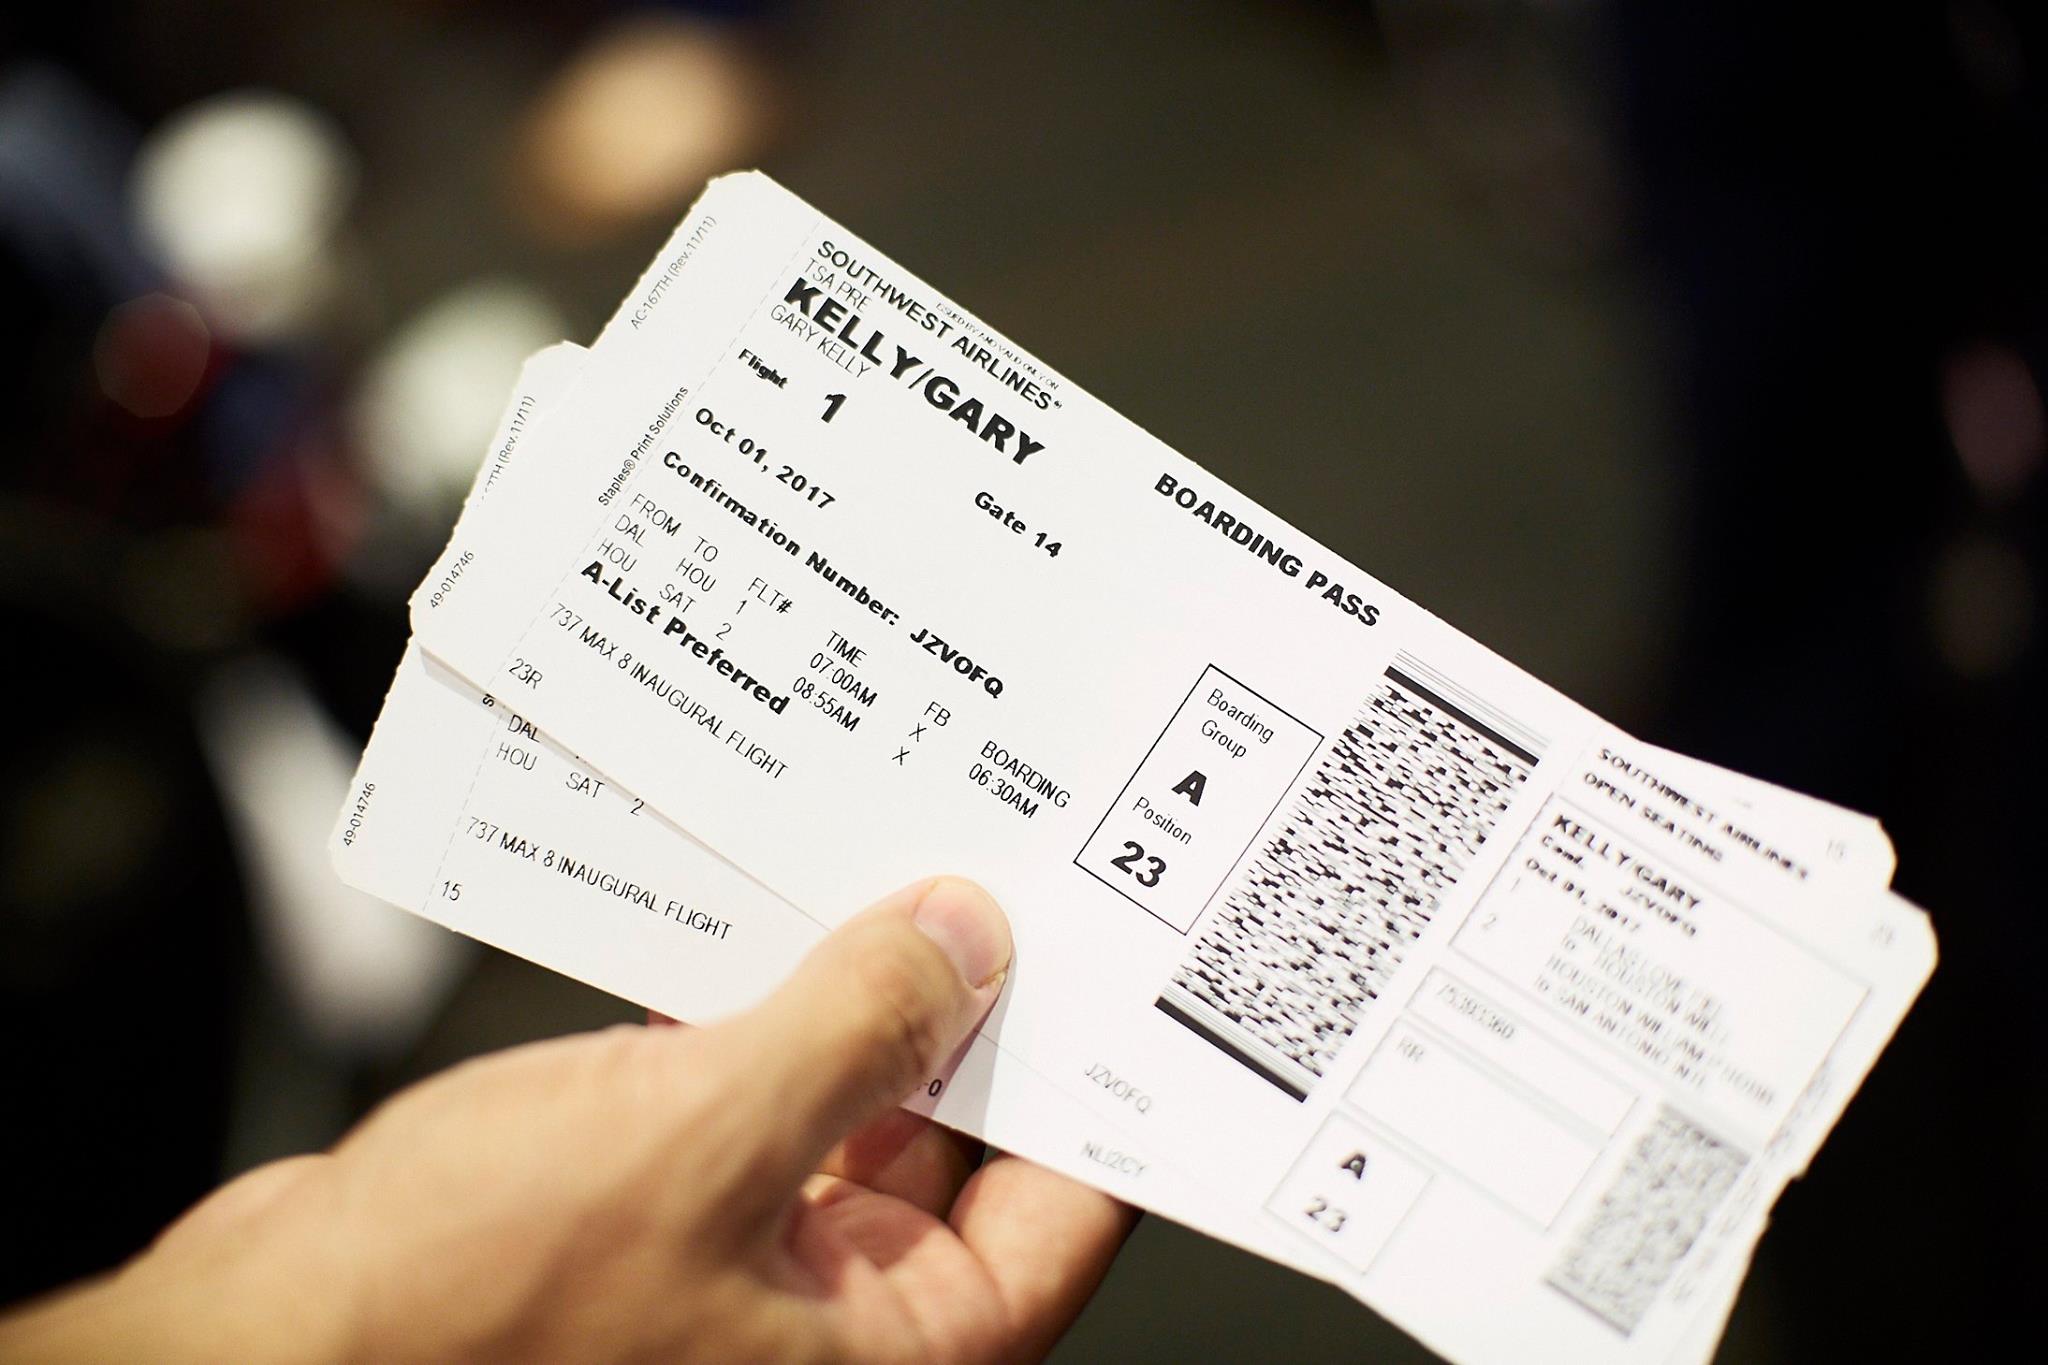 printing southwest airlines boarding pass